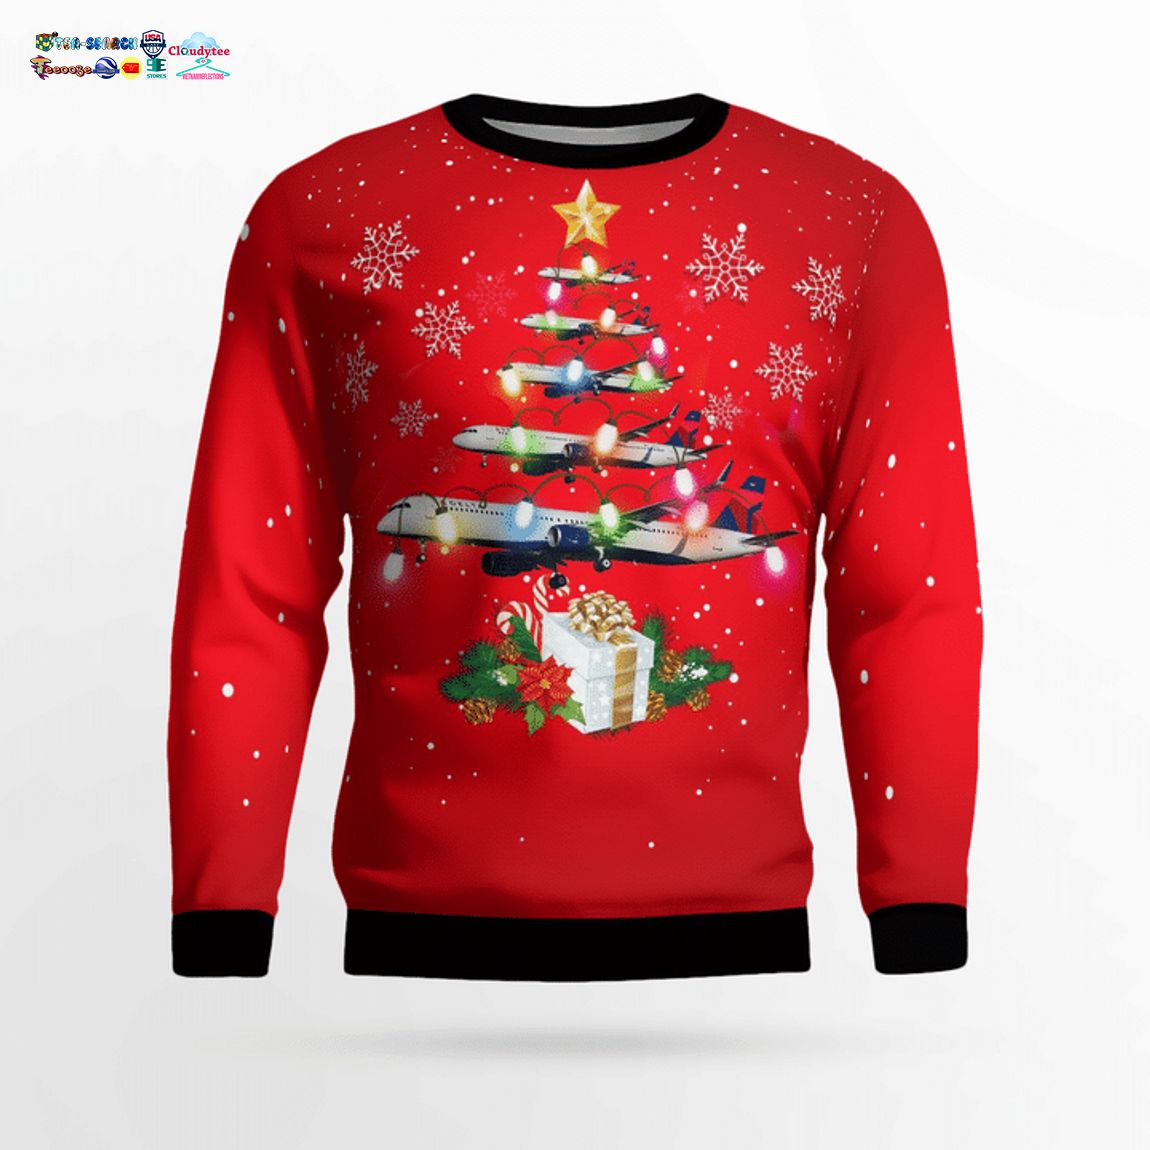 Delta Air Lines Airbus A321-200 3D Christmas Sweater